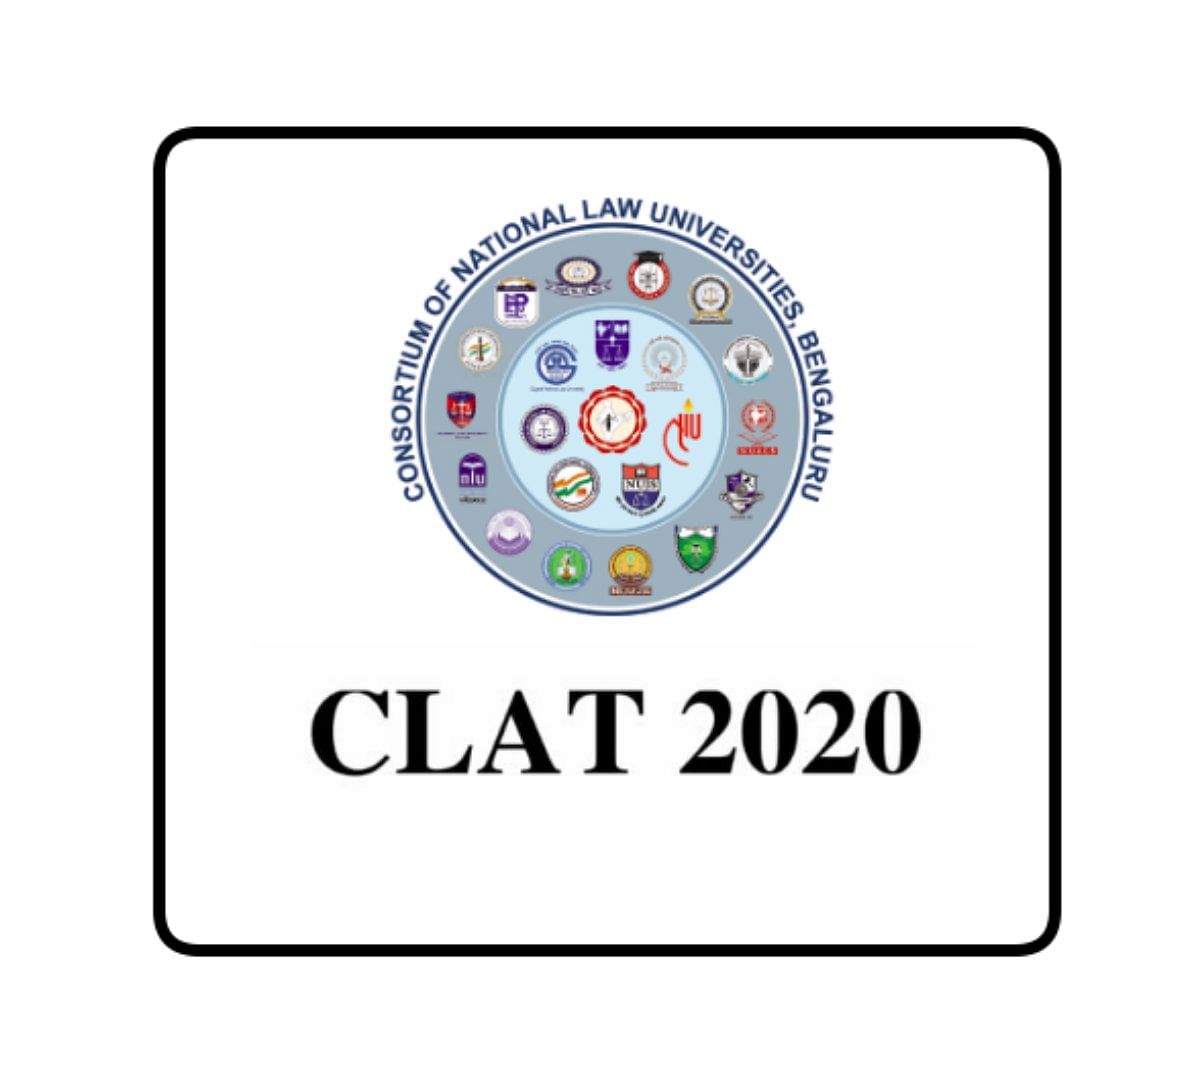 CLAT 2020 Admit Card: Examination to Held as per Scheduled Date, Be Aware of Fake News